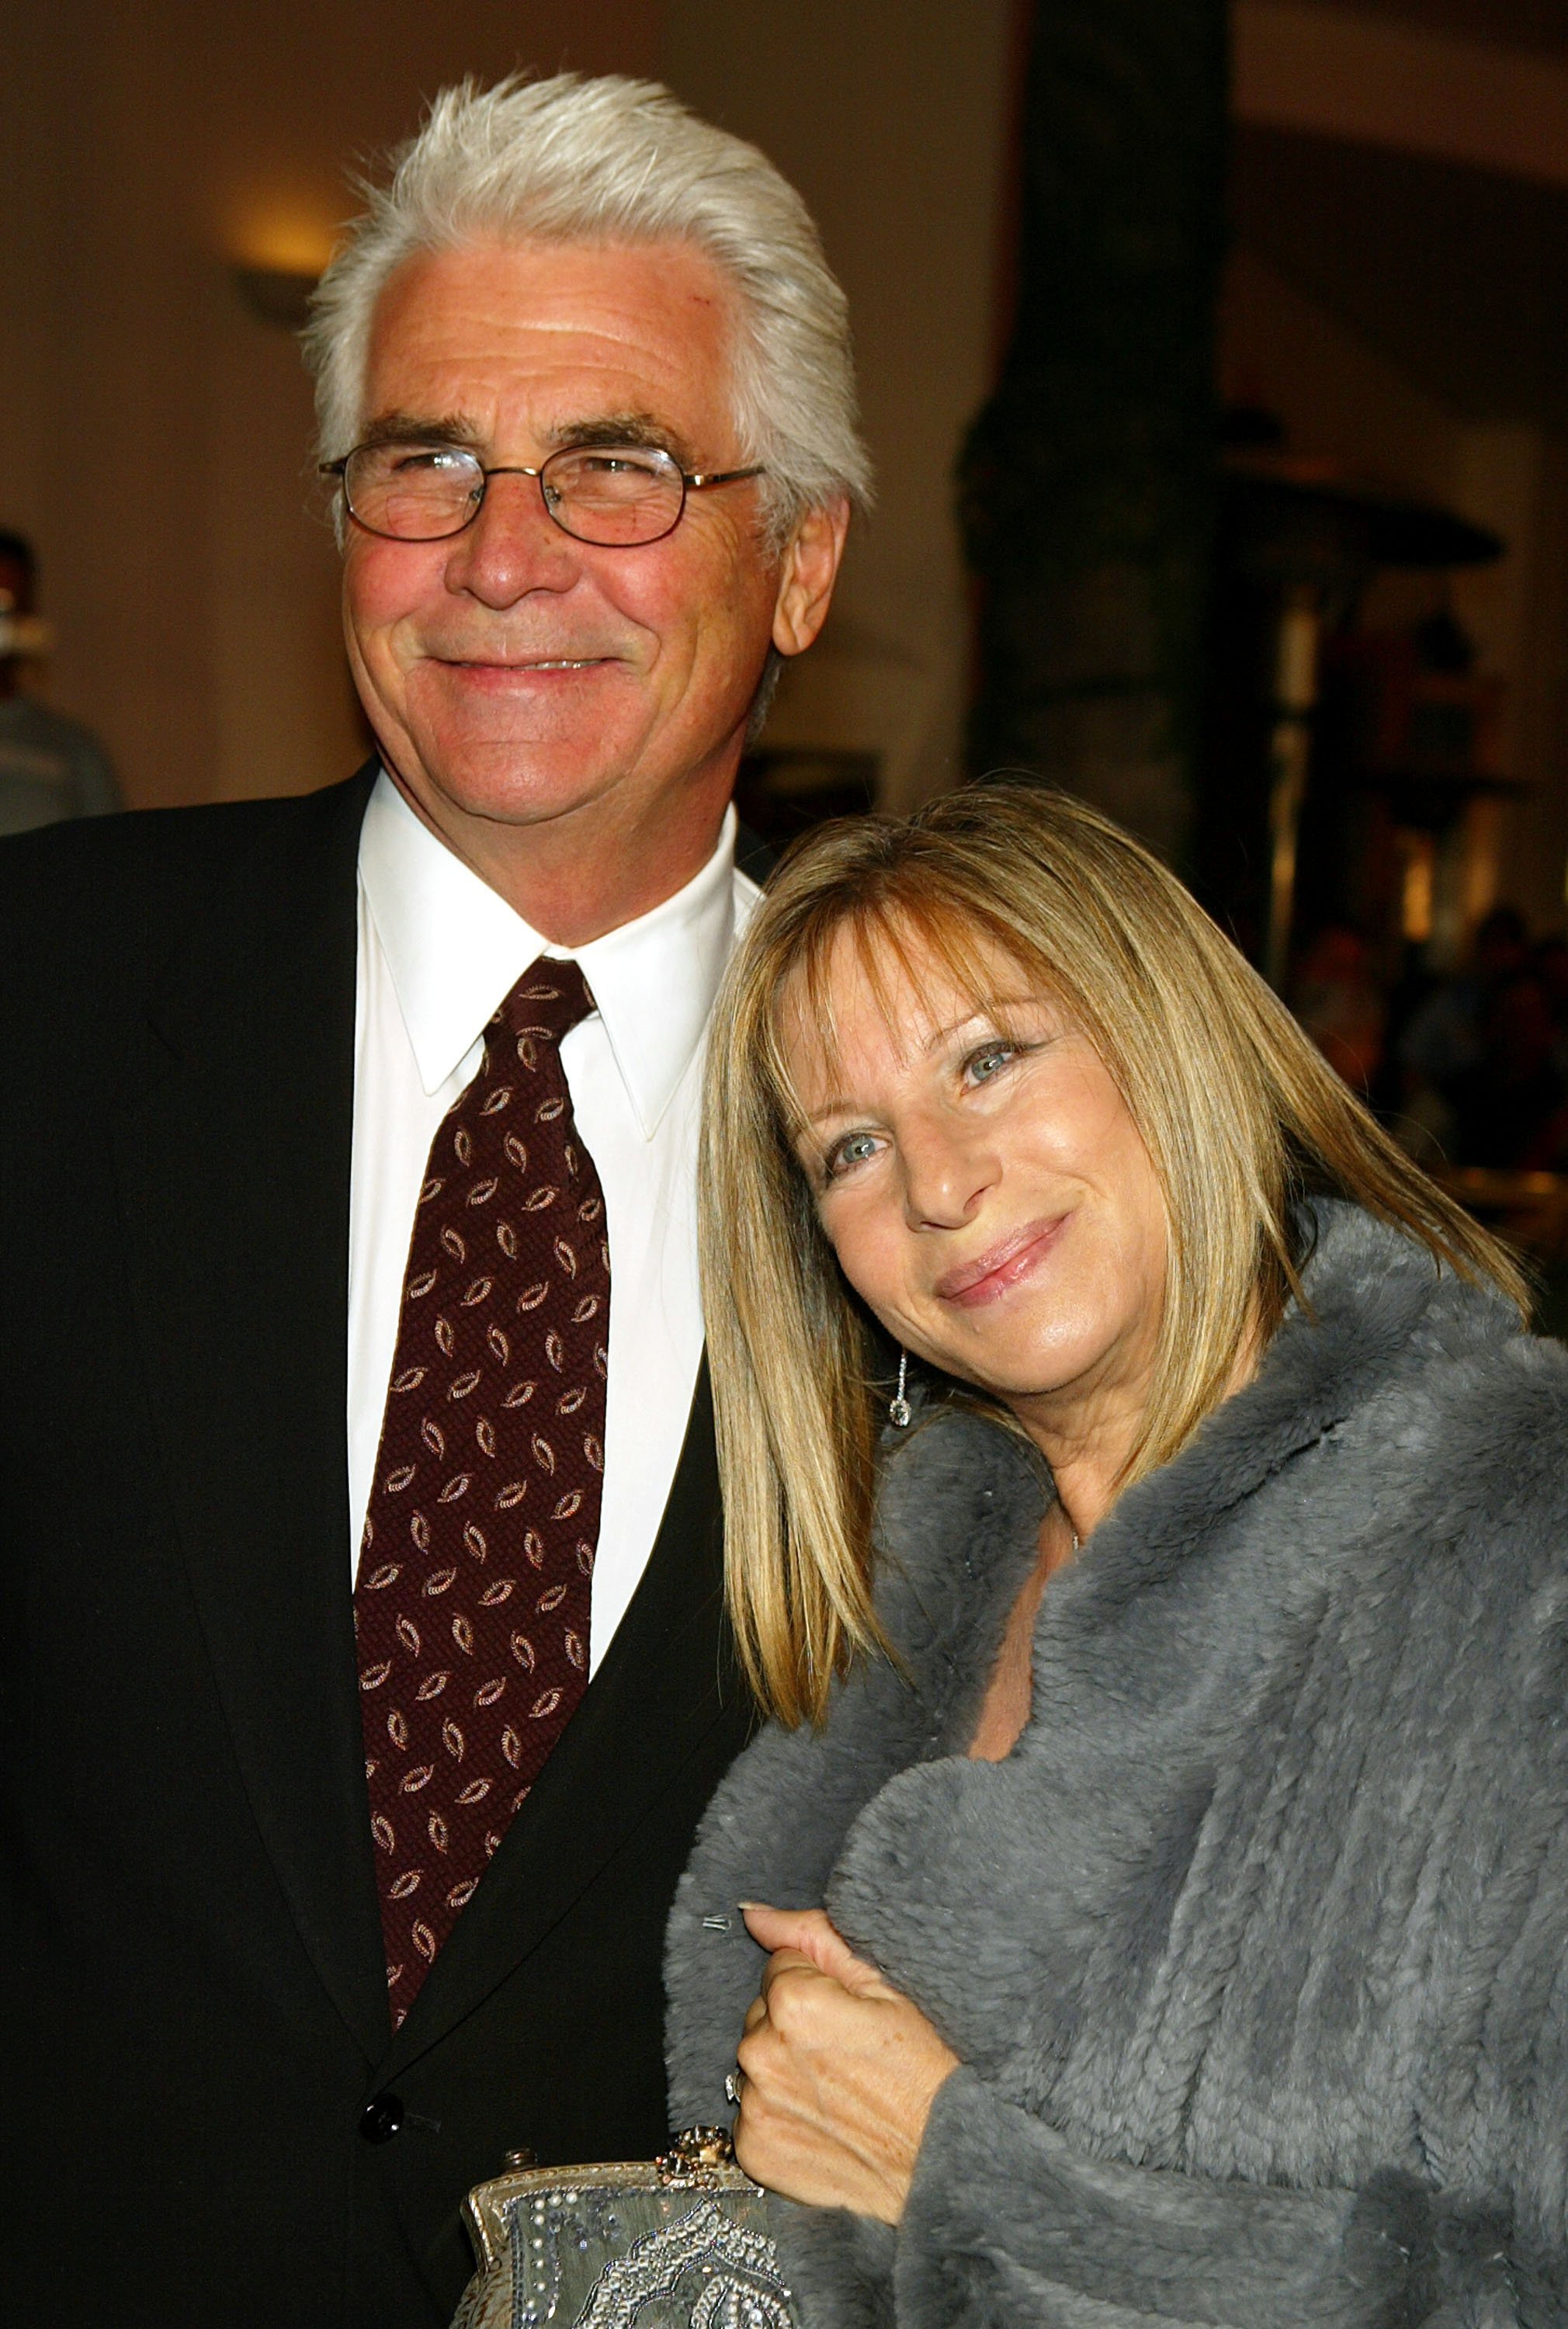 Barbra Streisand and James Brolin at the premiere of "Meet the Fockers" on December 16. 2004 | Photo: GettyImages